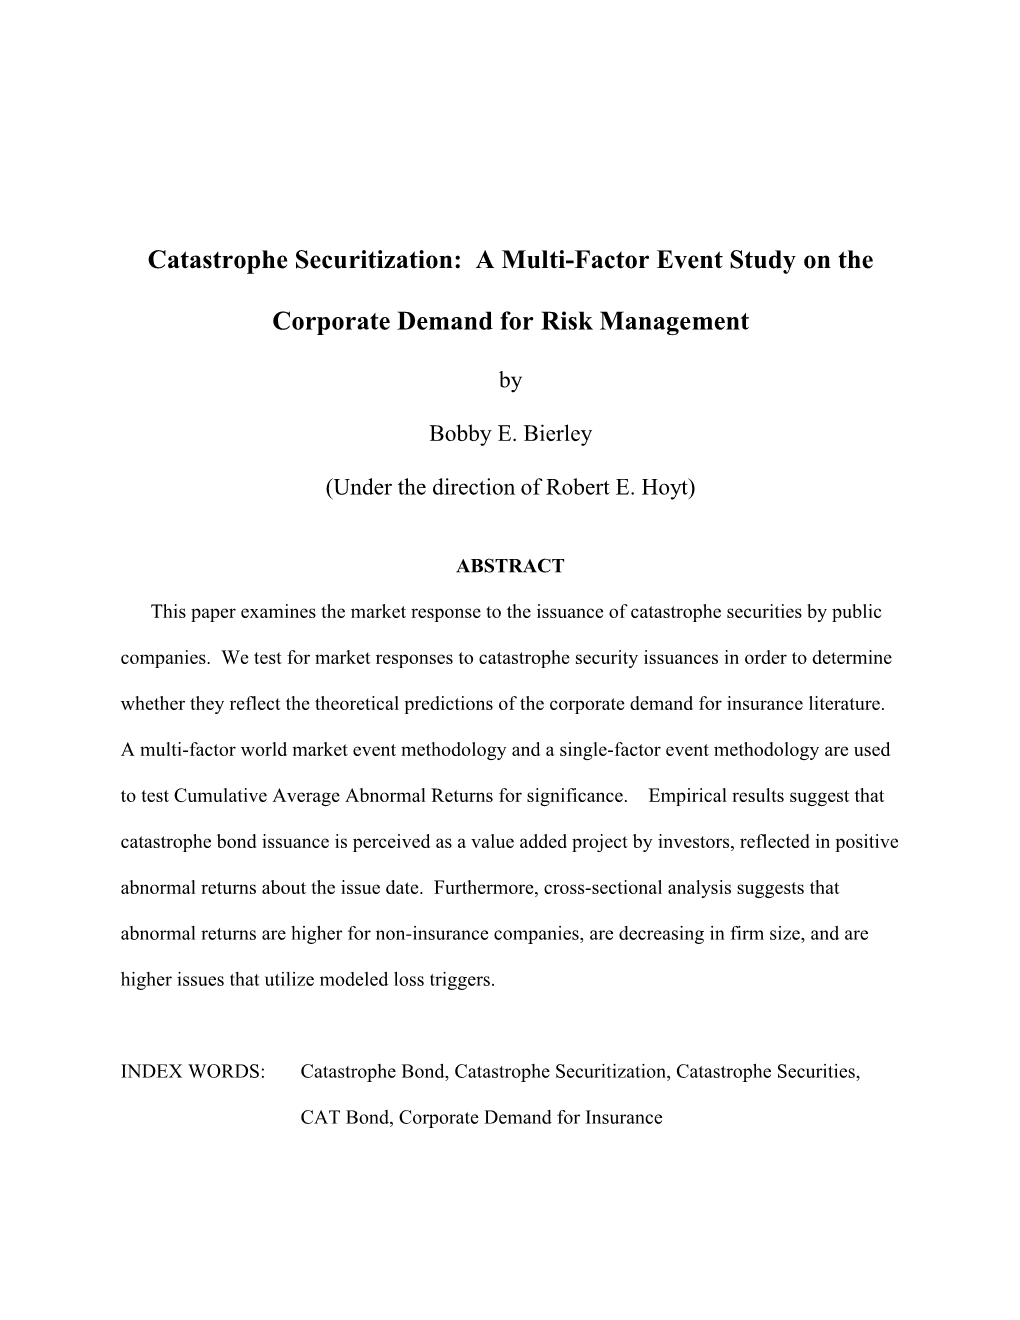 Catastrophe Securitization: a Multi-Factor Event Study on The